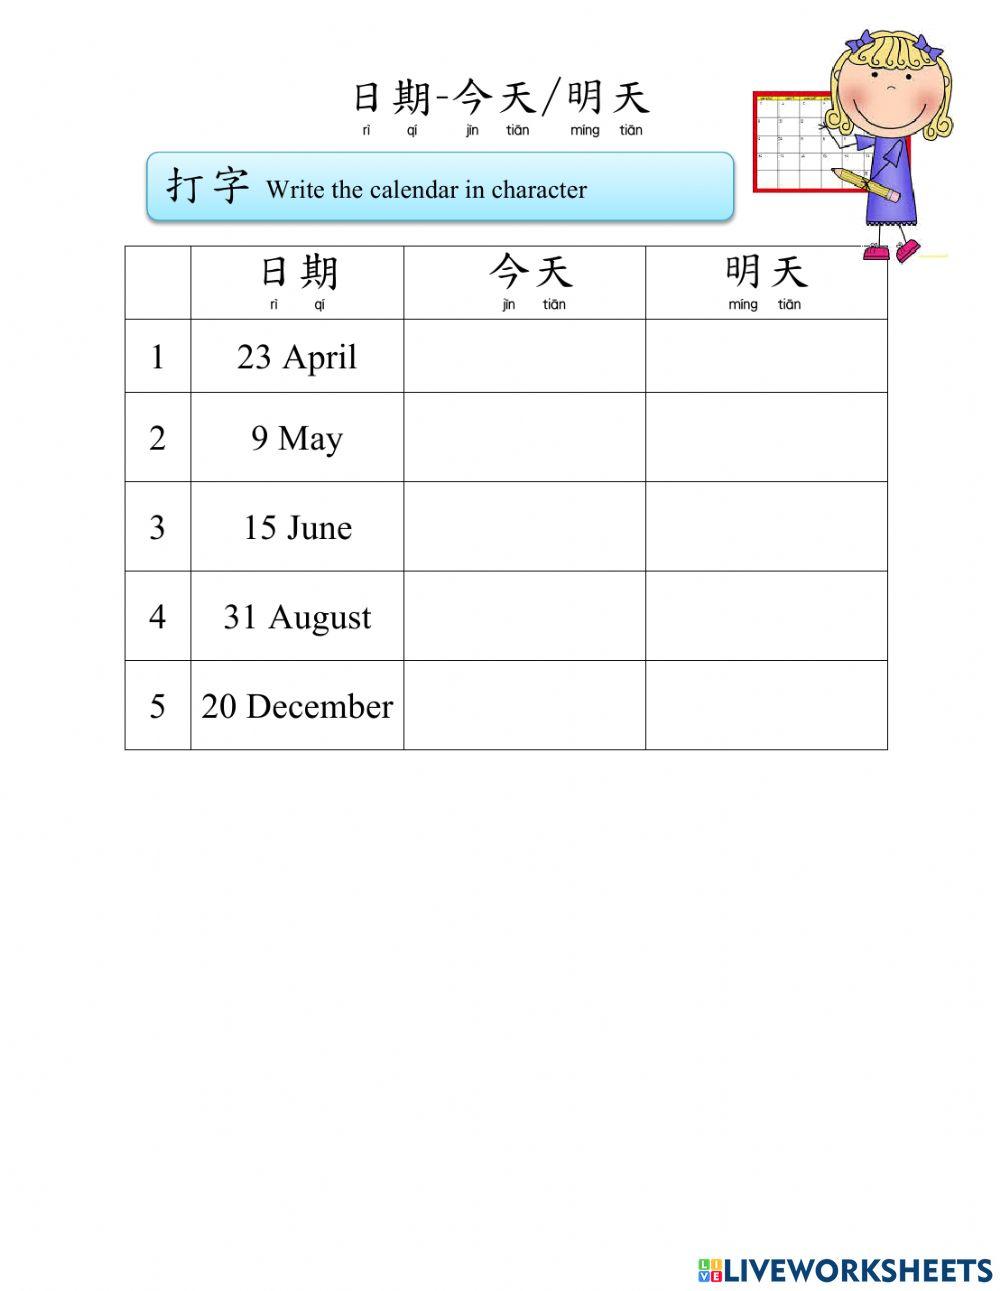 Calendar-mon day-English to Chinese